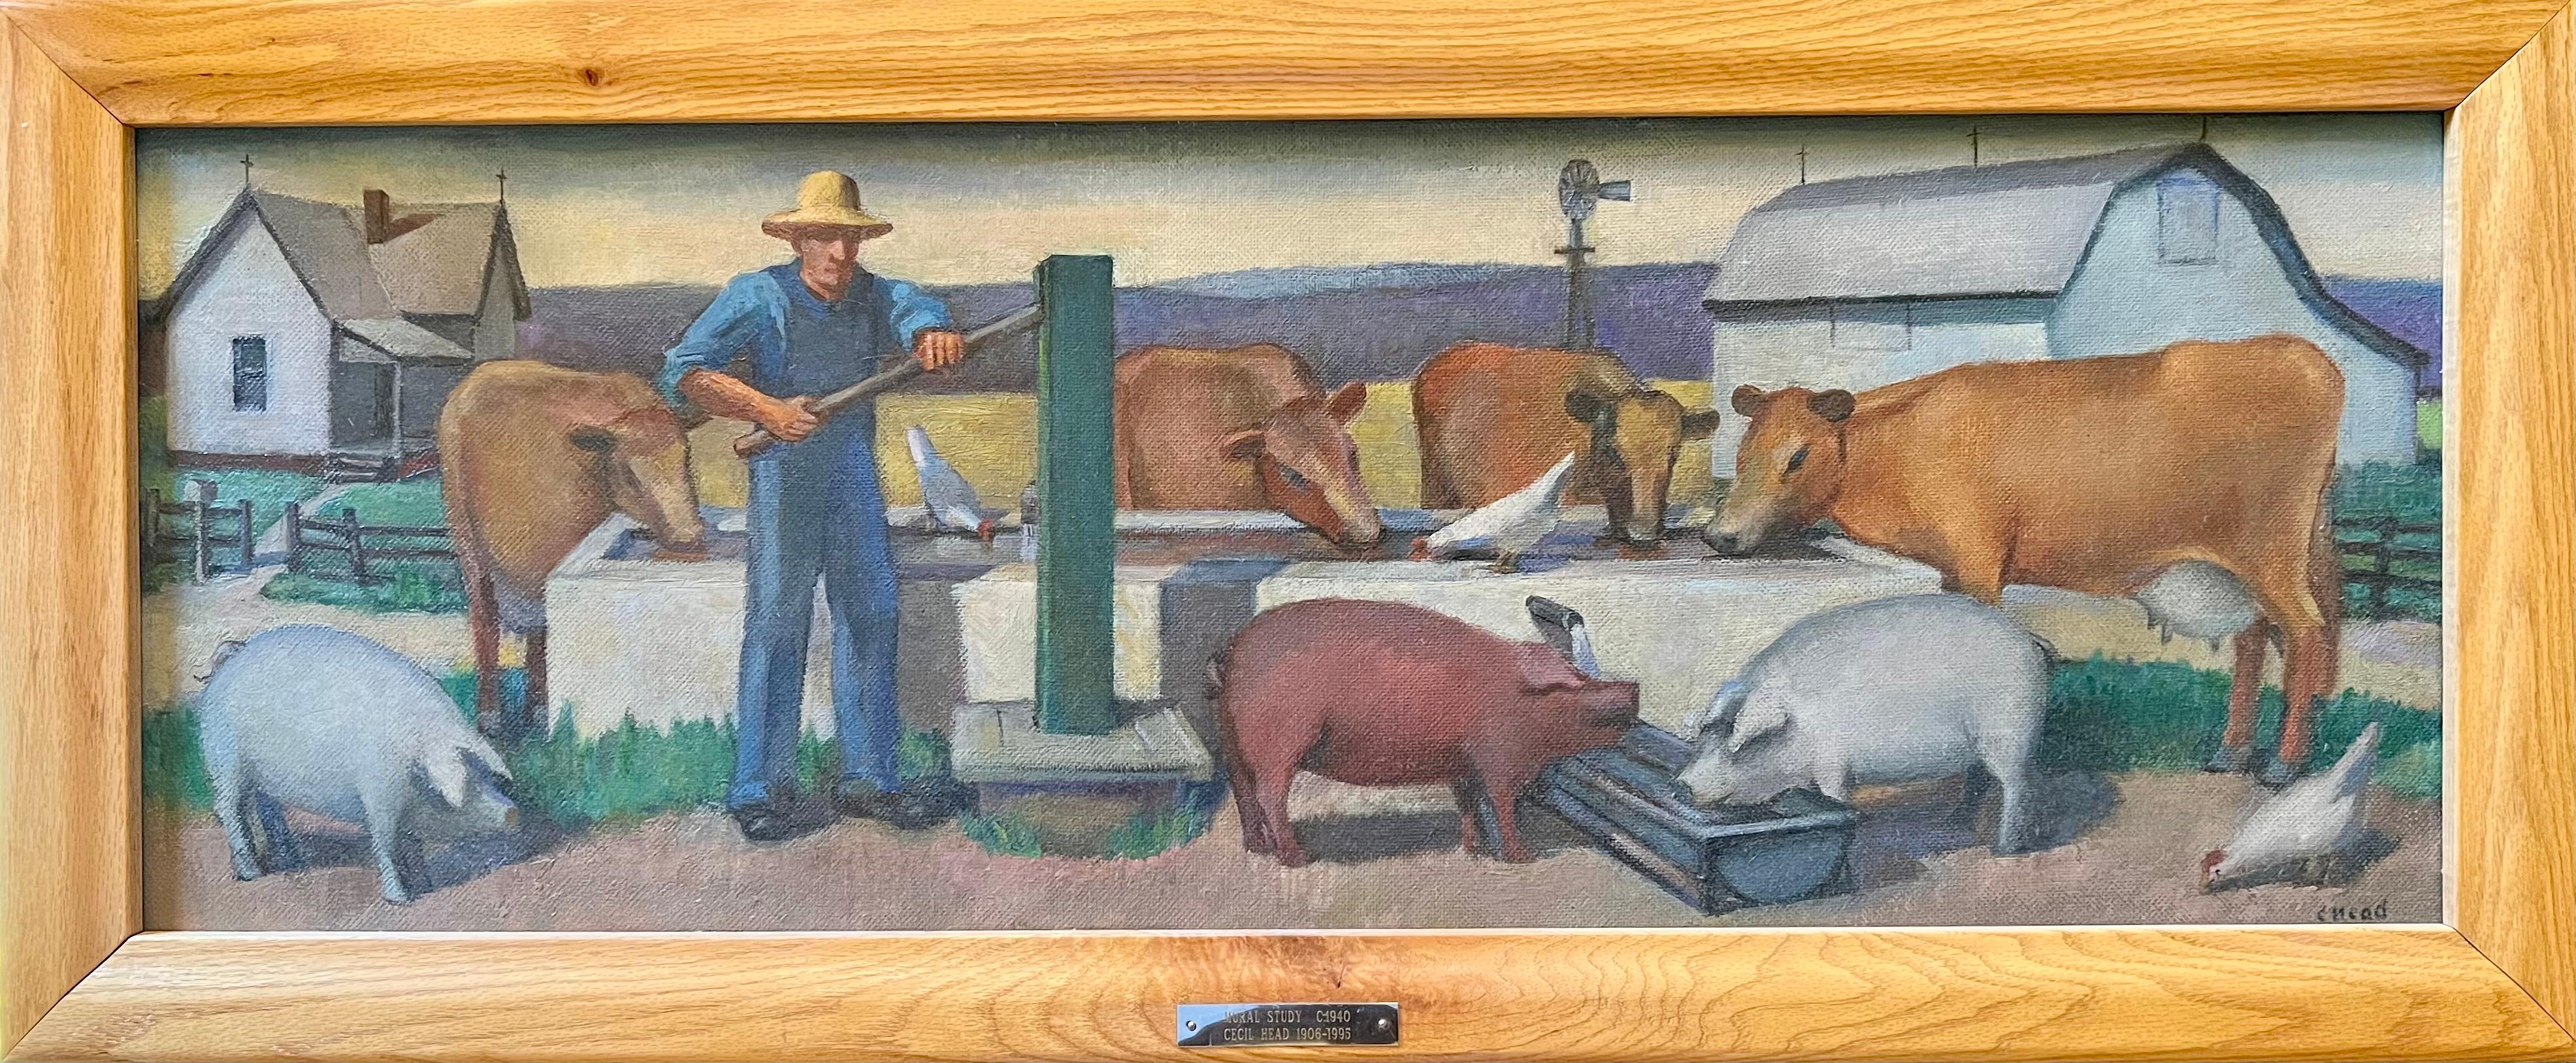 Farm Mural Study - Painting by Cecil Head